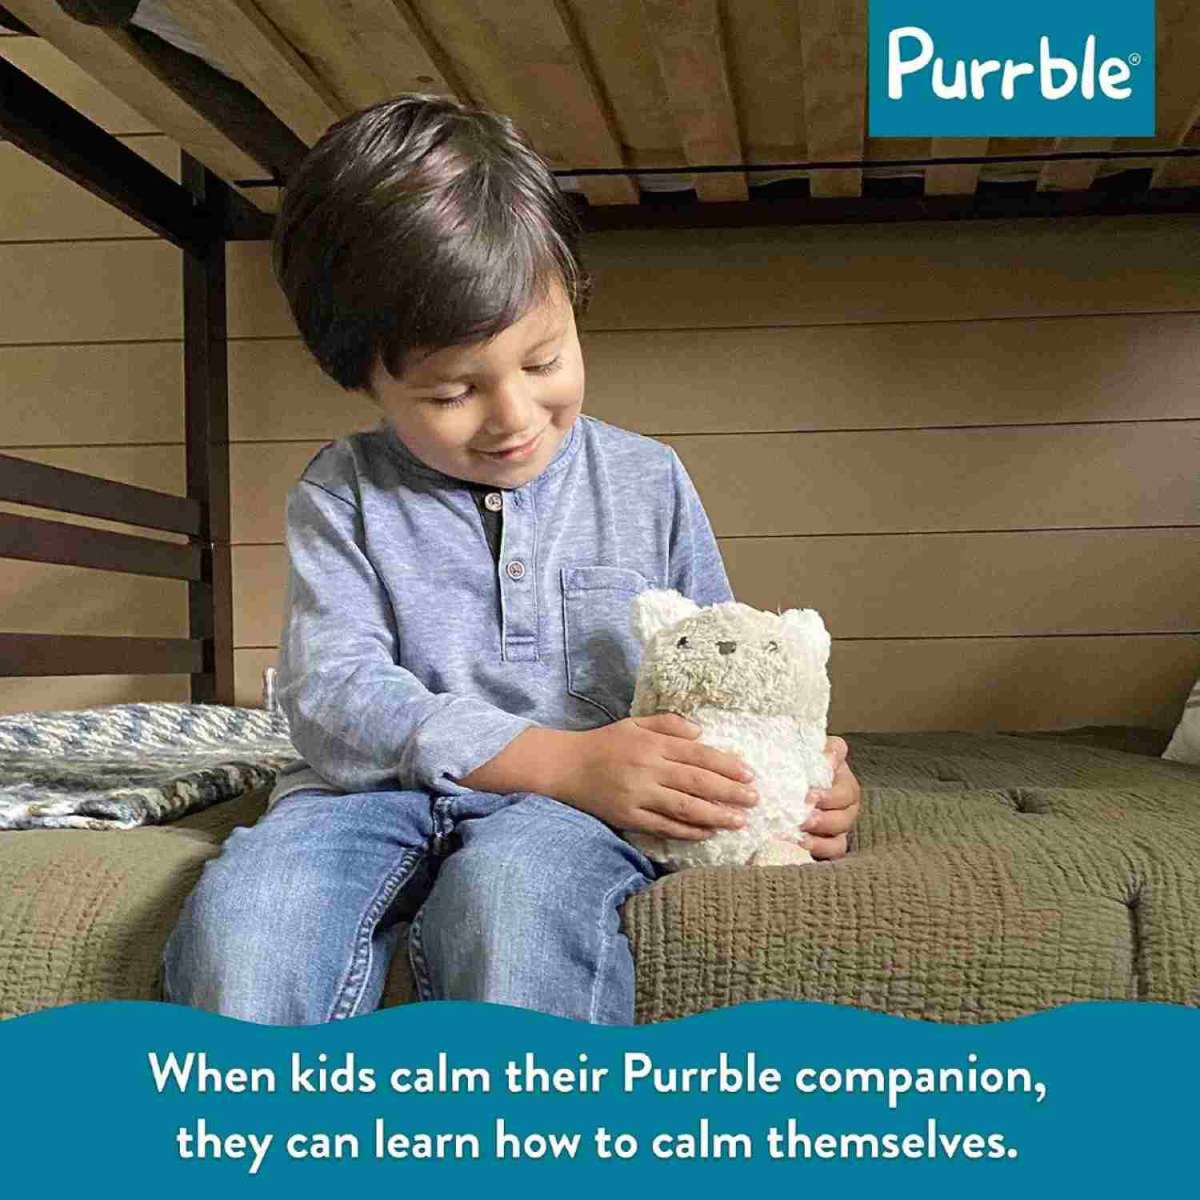 Purrble is a care-free calming companion